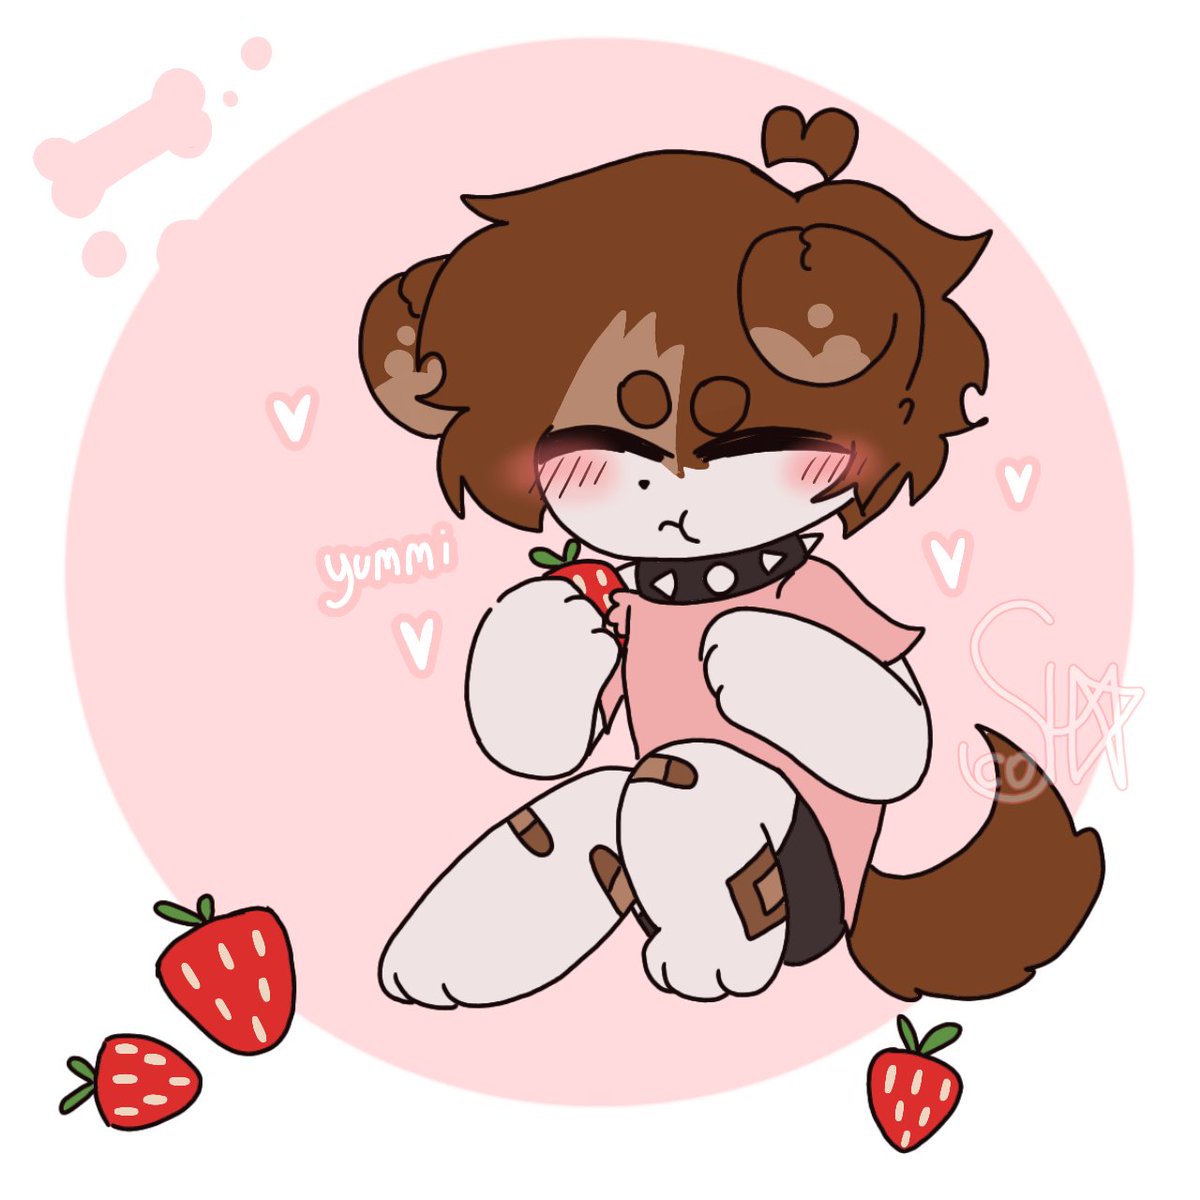 Shhh..Bean is eating rn!! >:< ♡ !!DO NOT DO DRP OR ANY SEXUAL ACTS ON THIS LIL CREATURE!!
.
.
.
#OC #Ocdrawing #art #artwork #babypuppy #strawberry #FYP